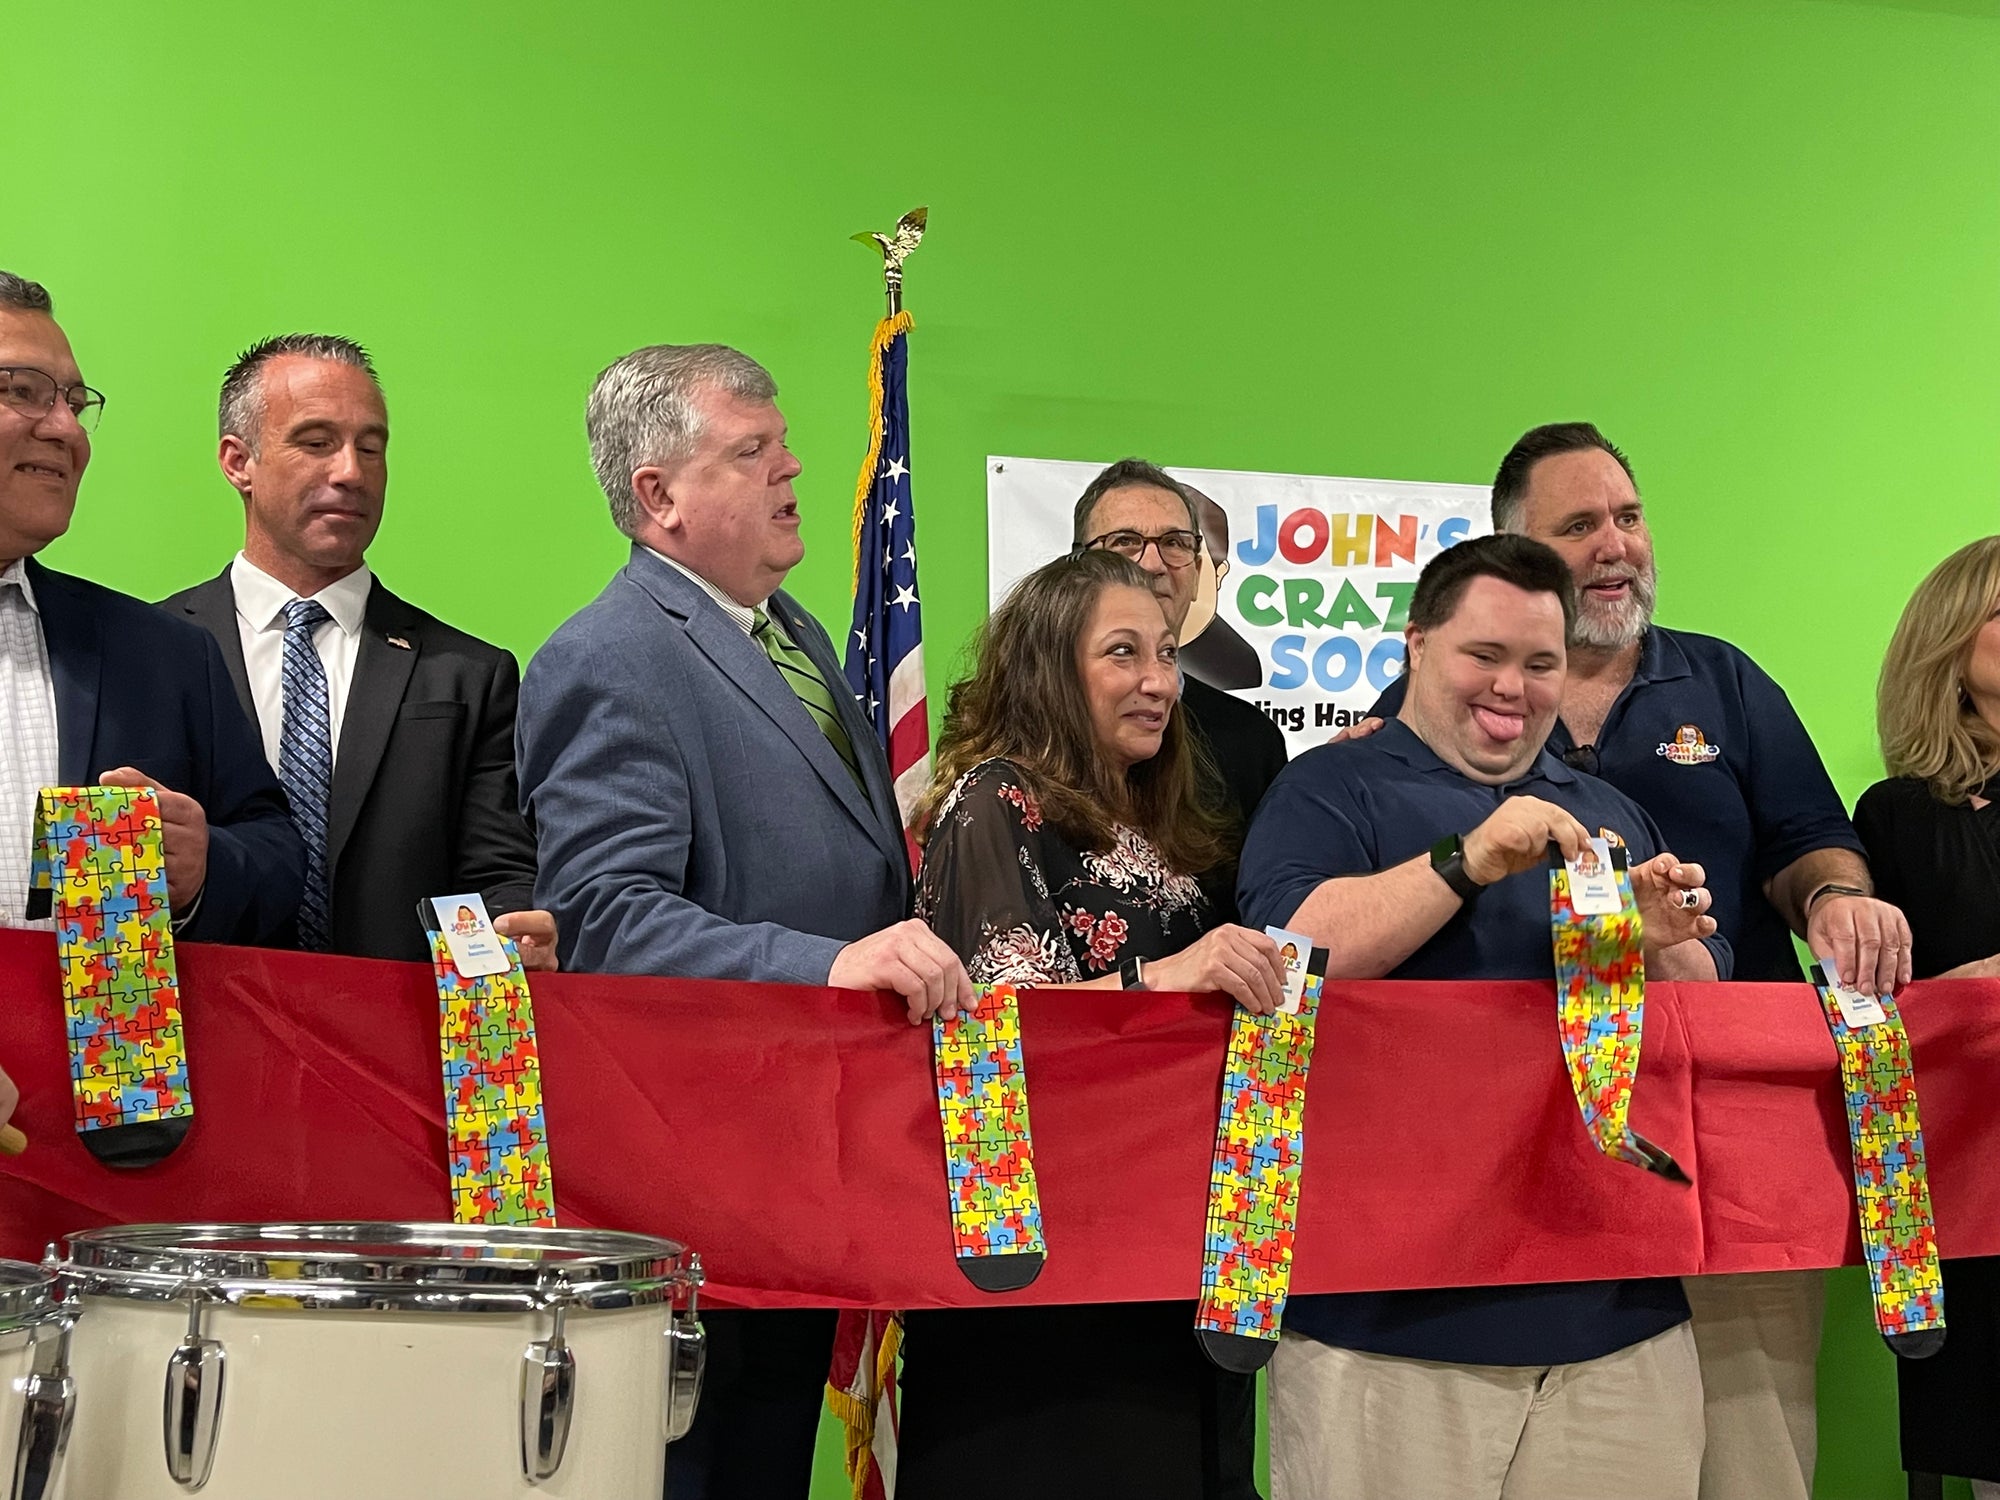 Johns Crazy Socks Hosts Ribbon Cutting and Grand Opening Ceremony for New Headquarters in Farmingdale New York